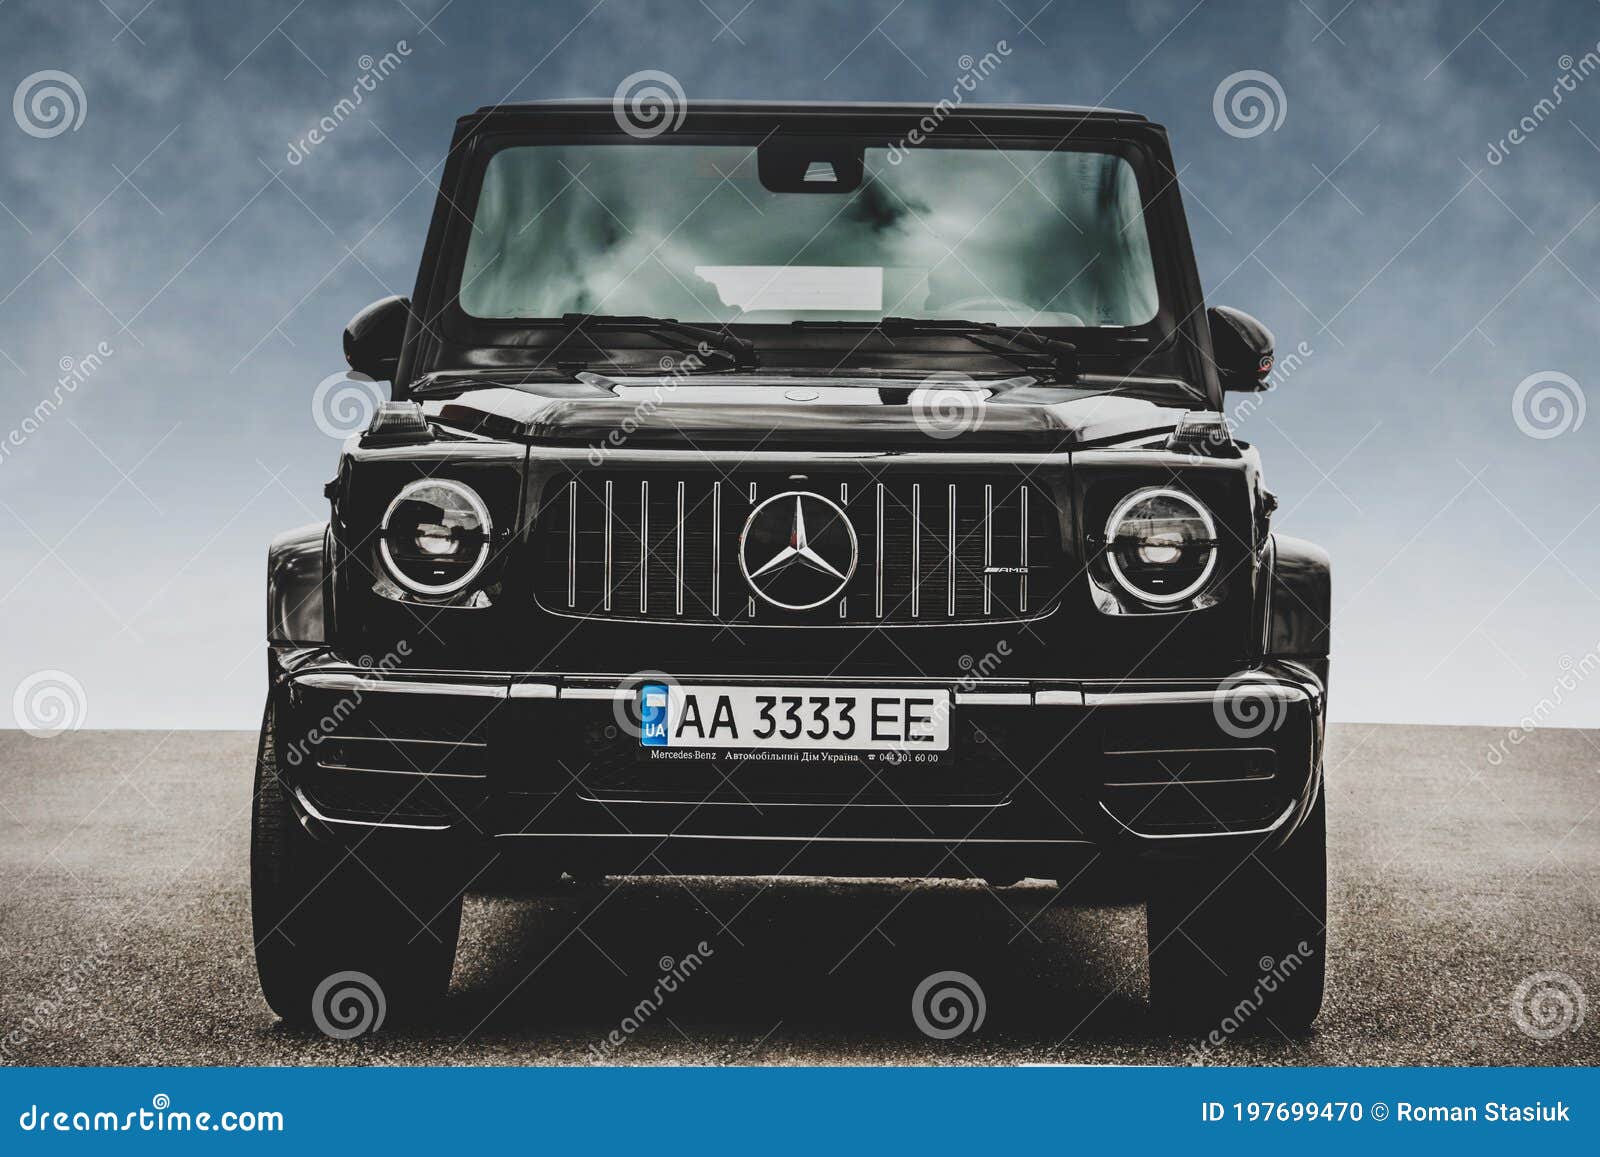 Kiev Ukraine May 19 Mercedes Benz G Class Amg Against The Sky Wallpaper Background Editorial Image Image Of Dashboard Chrome